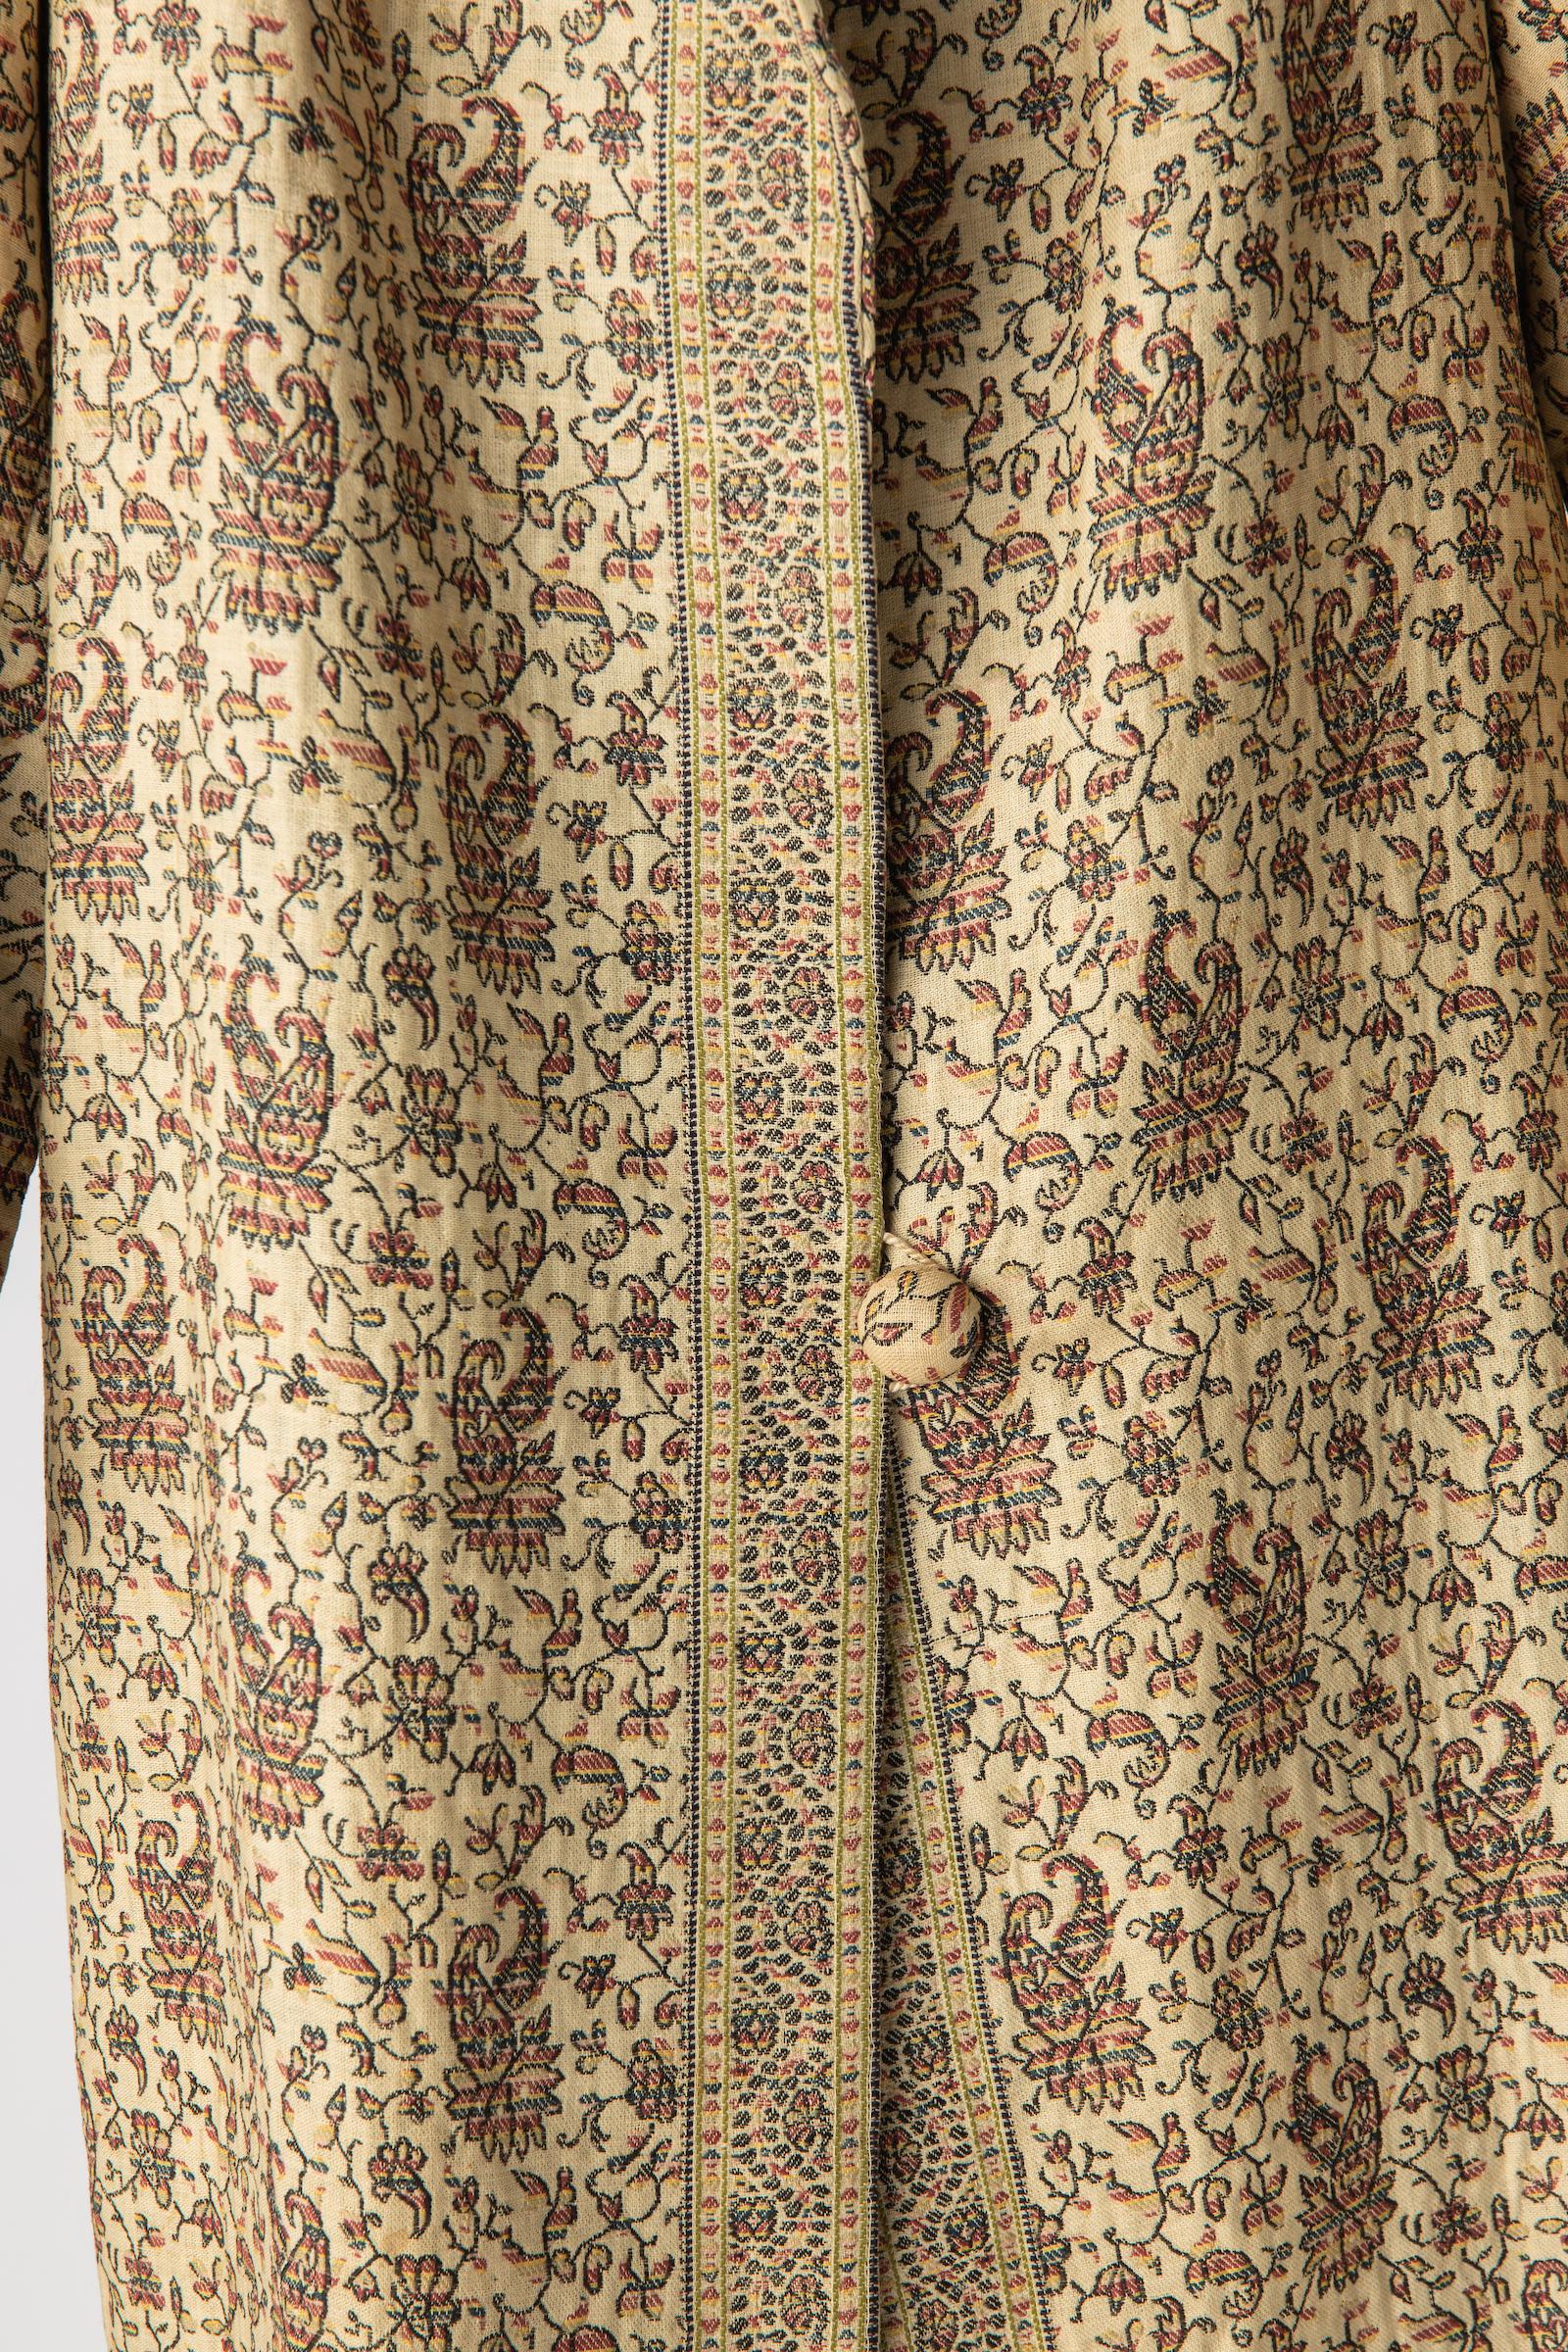 Beige Genuine Ottoman Egyptian Couture Art Deco Hand Woven Paisley Brocade Coat For Sale